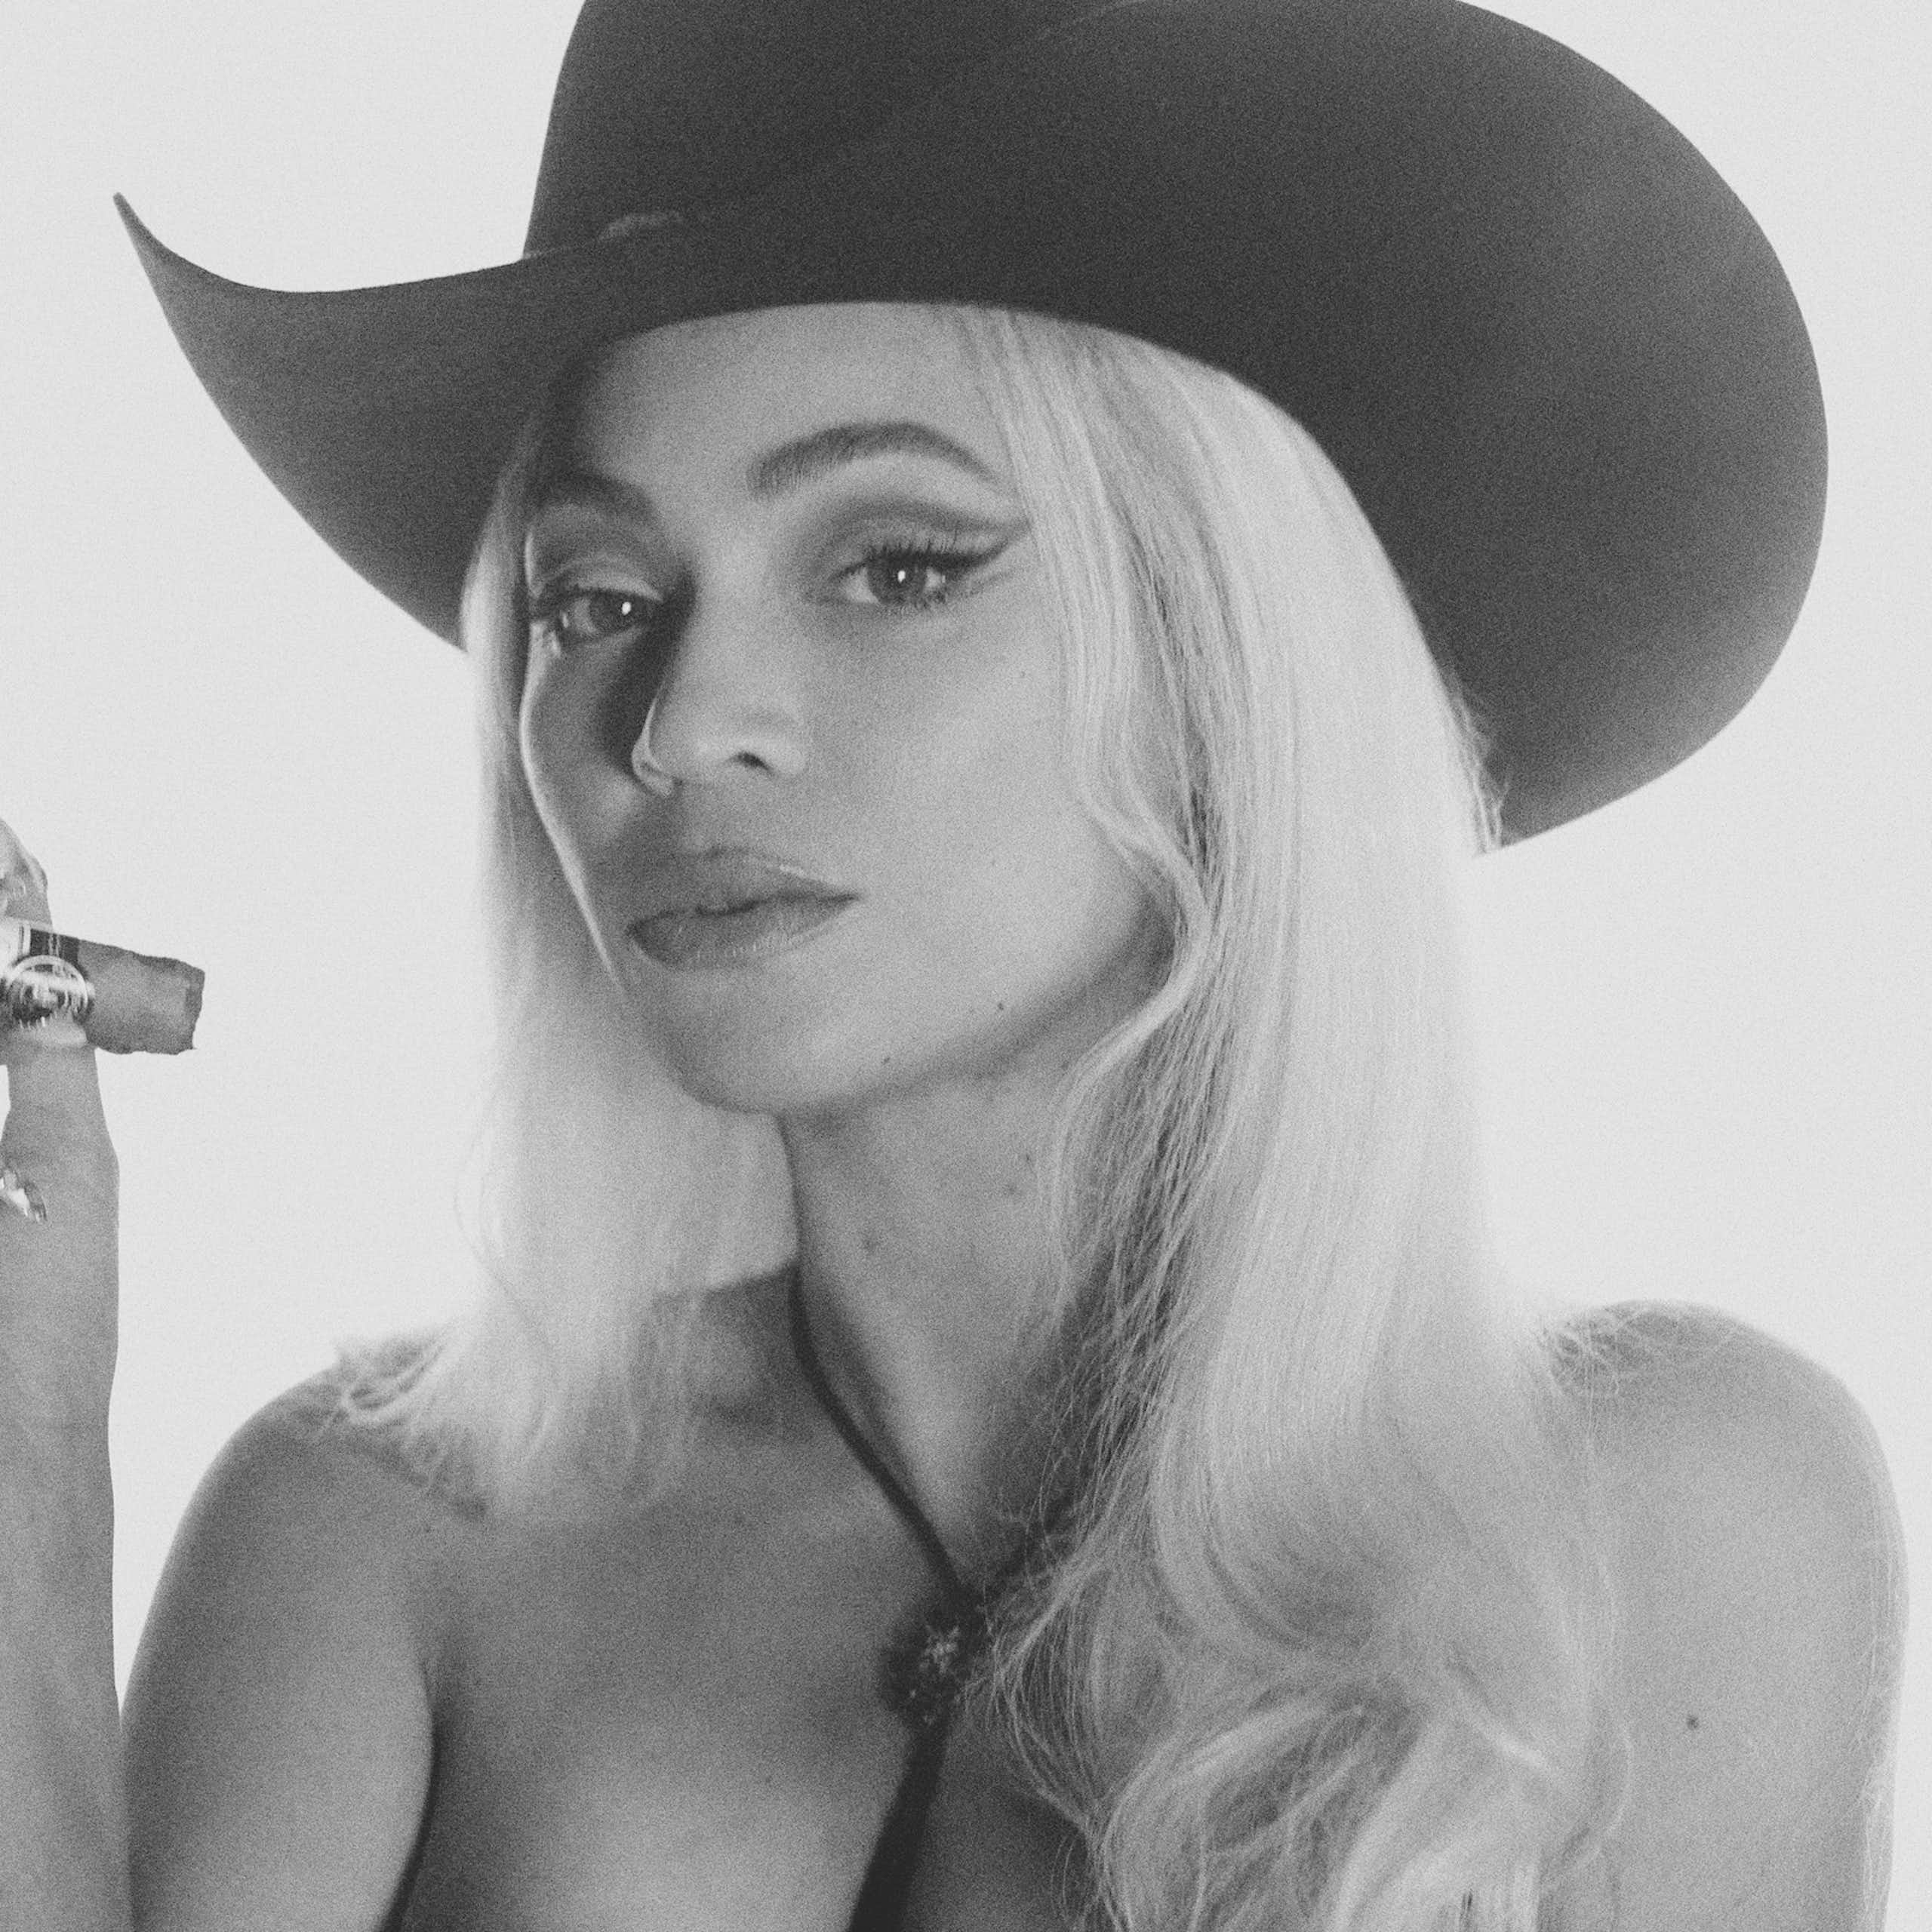 Beyonce in a stetson smoking a cigar.